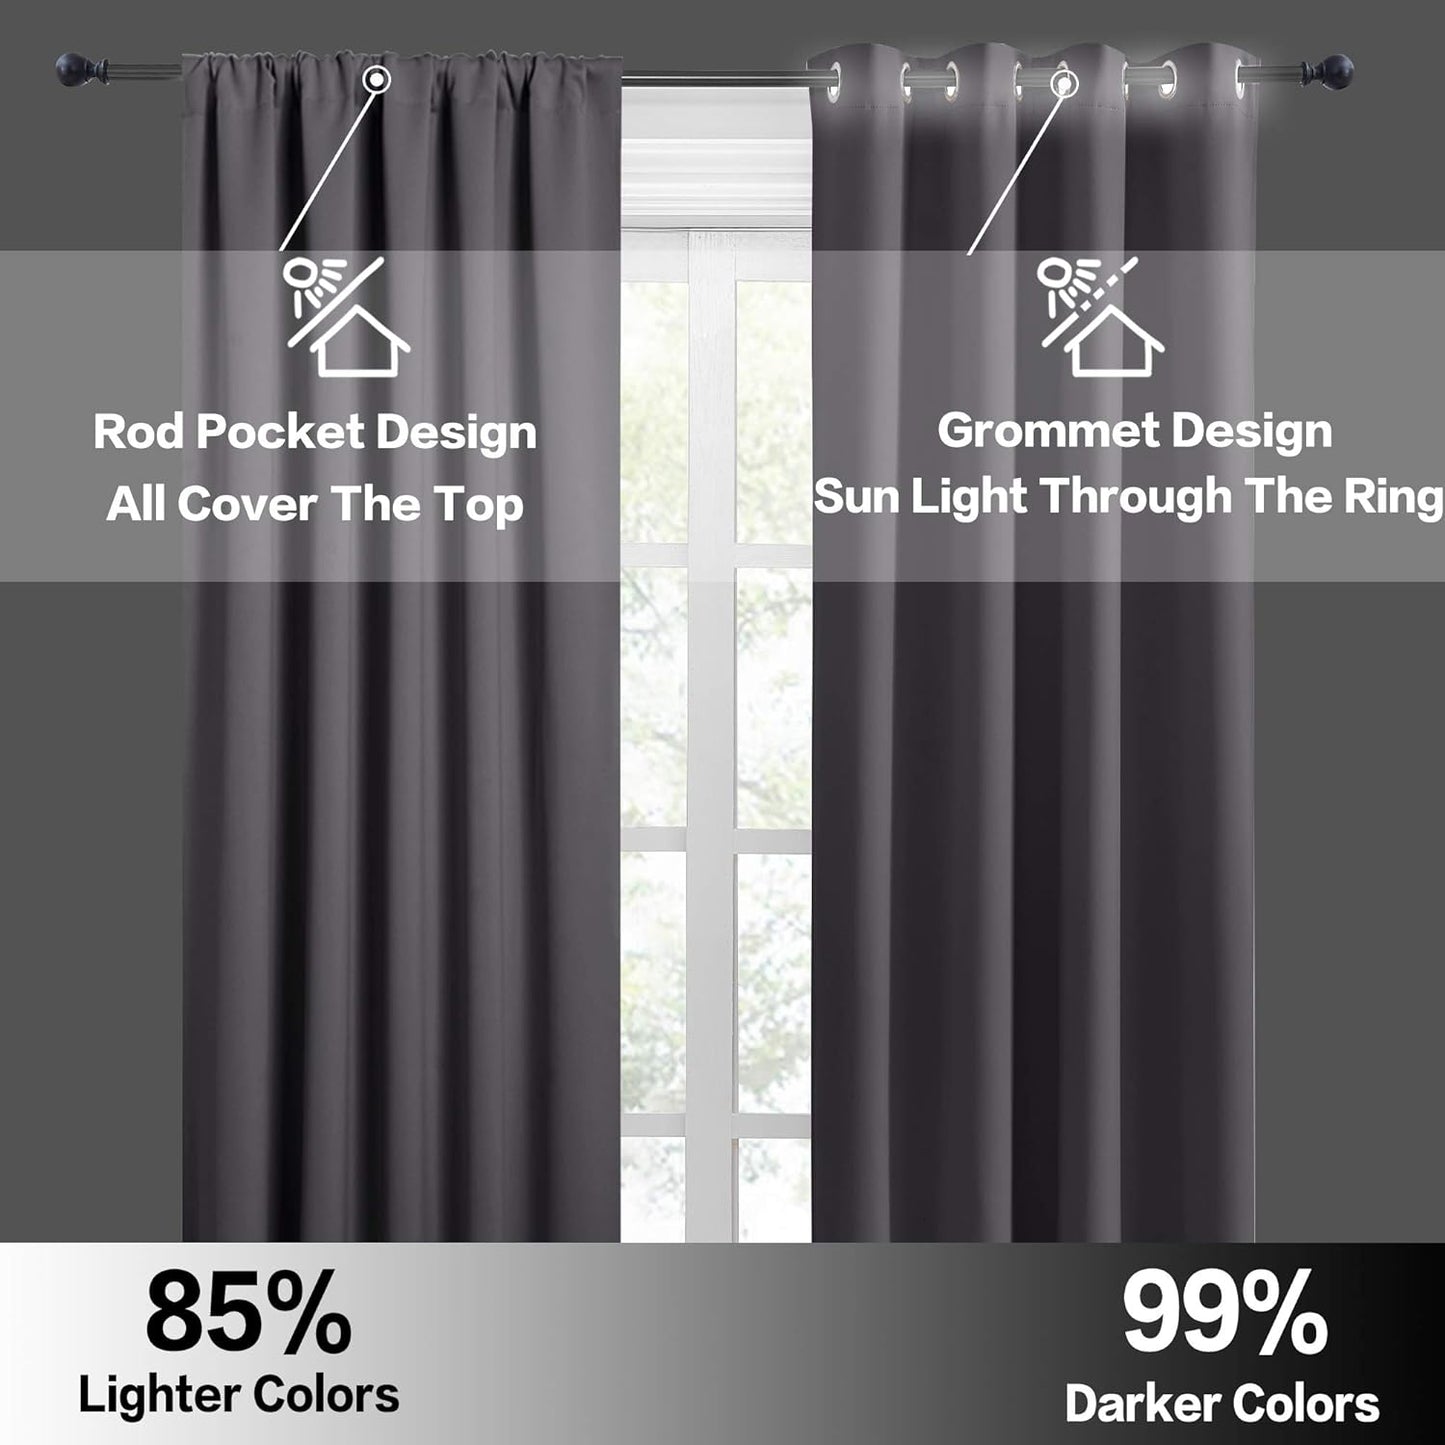 RYB HOME Short Curtains Half Window Curtains for Bedroom, Privacy Blackout Energy Saving Drapes for Living Room Bathroom Shades, Wide 29 X Long 24 Inches per Panel, Grey, 2 Pcs  RYB HOME   